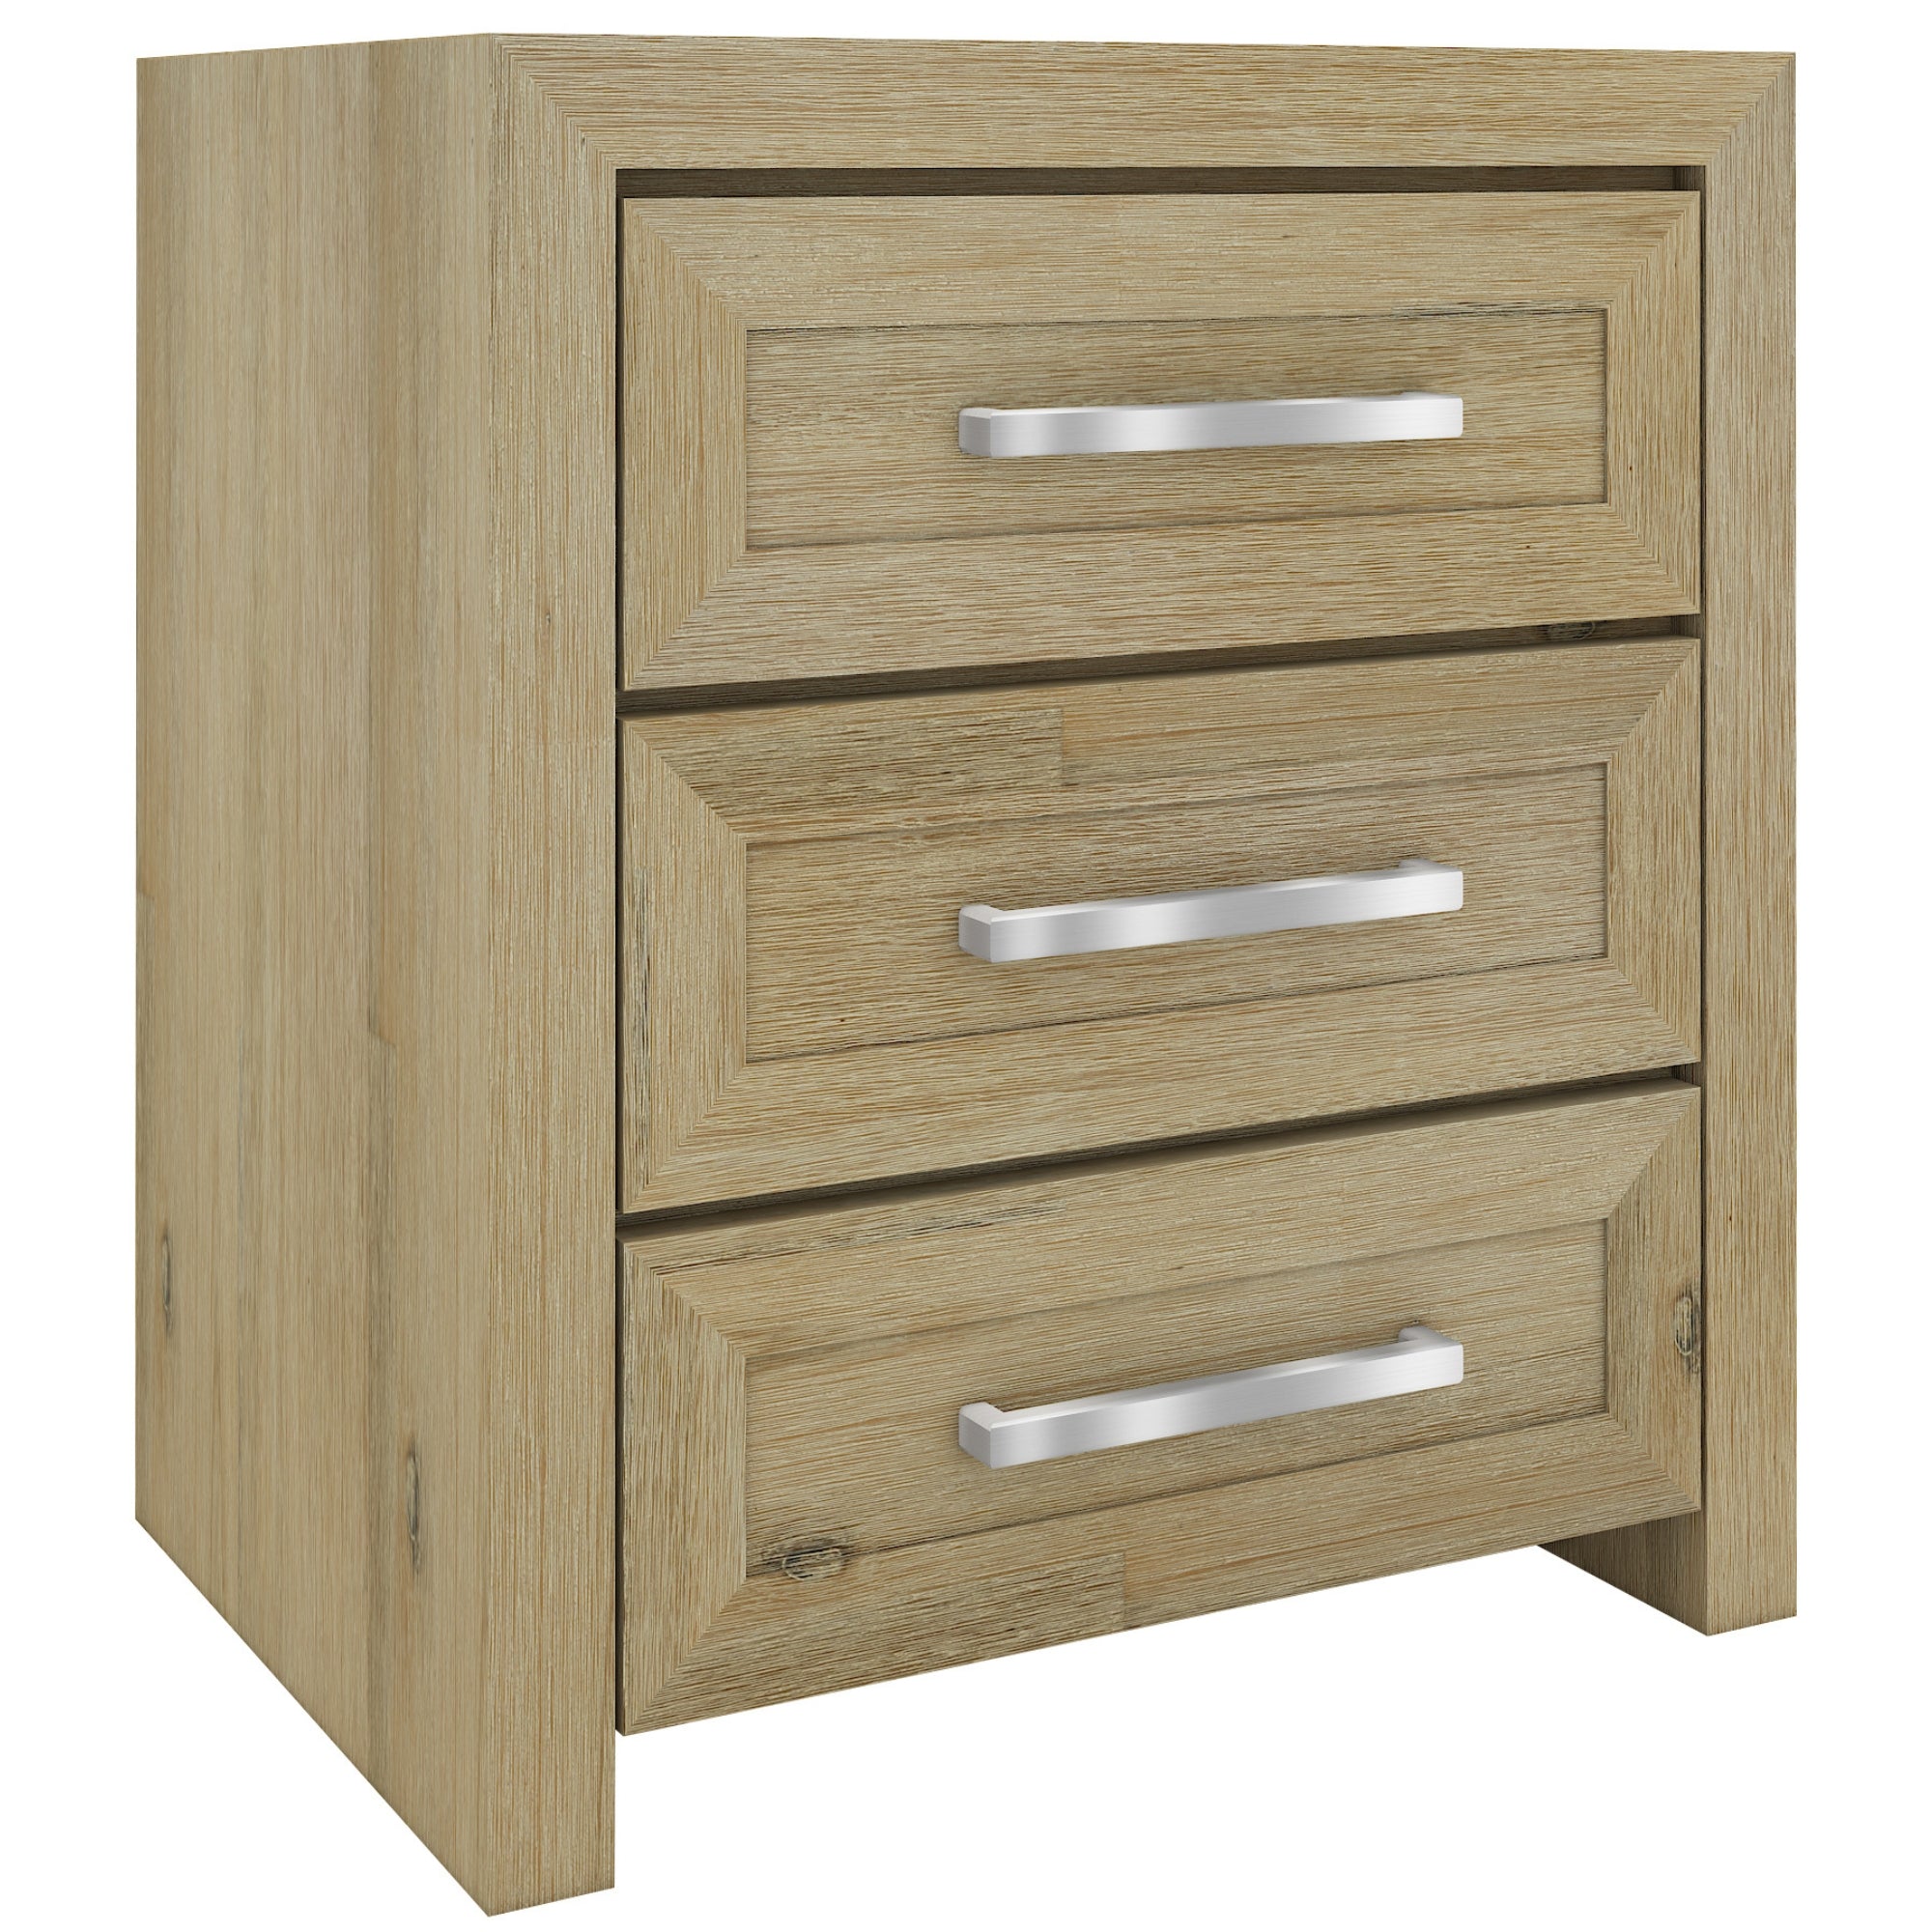 No Assembly Required! Bedside Table 3 Drawers - Smoke